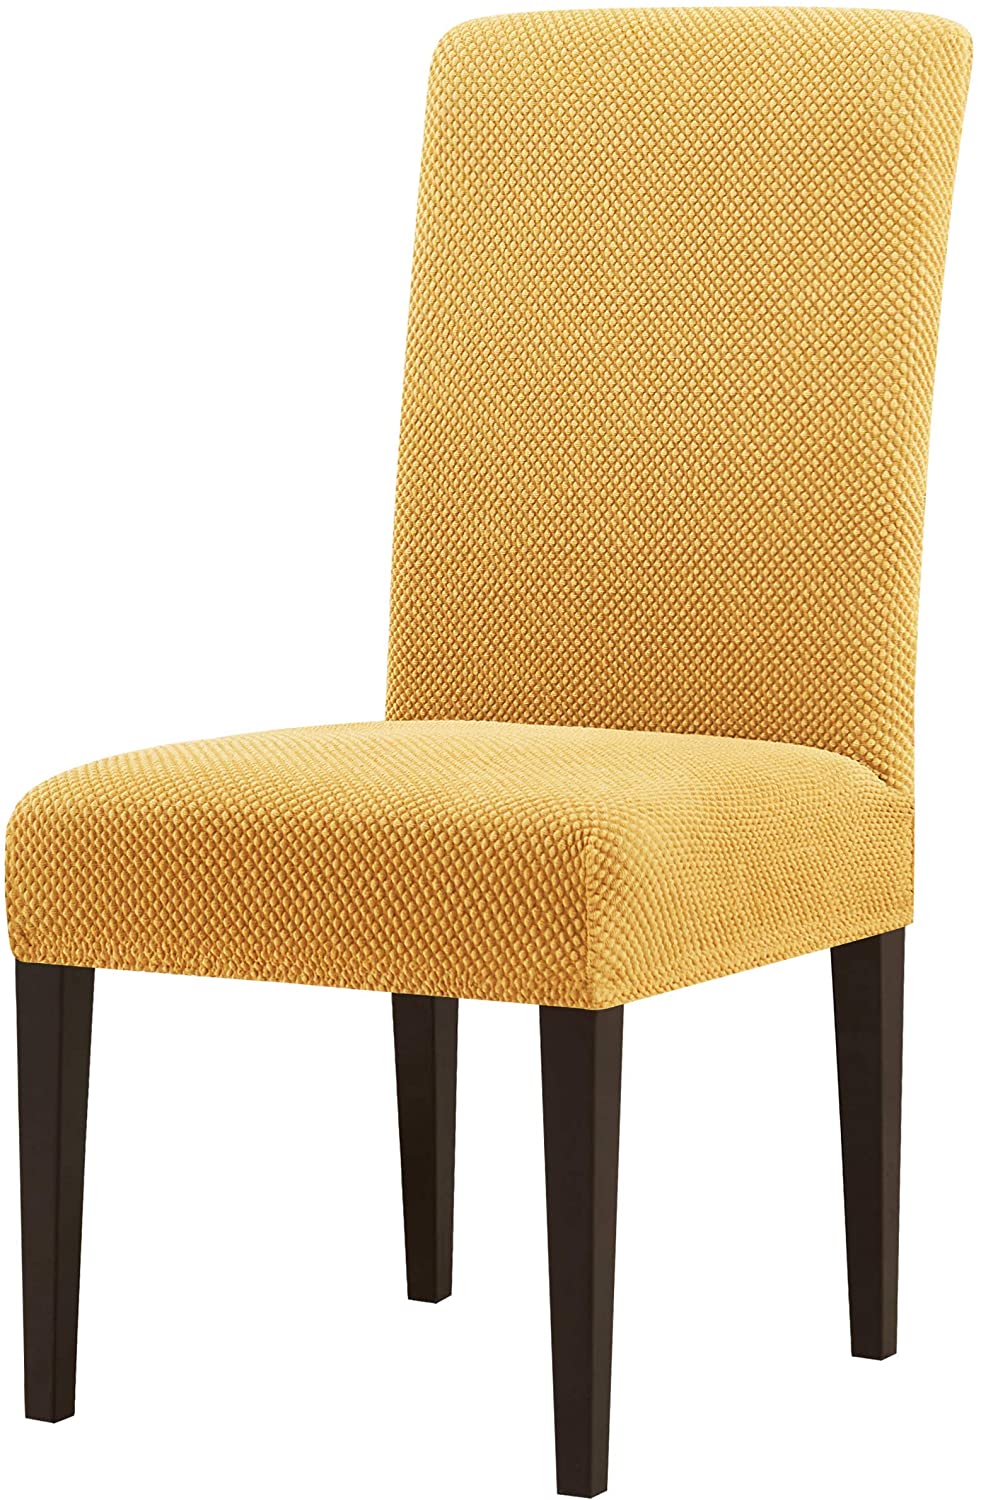 subrtex Dining Room Chair Slipcovers Jacquard Parsons Chair Covers